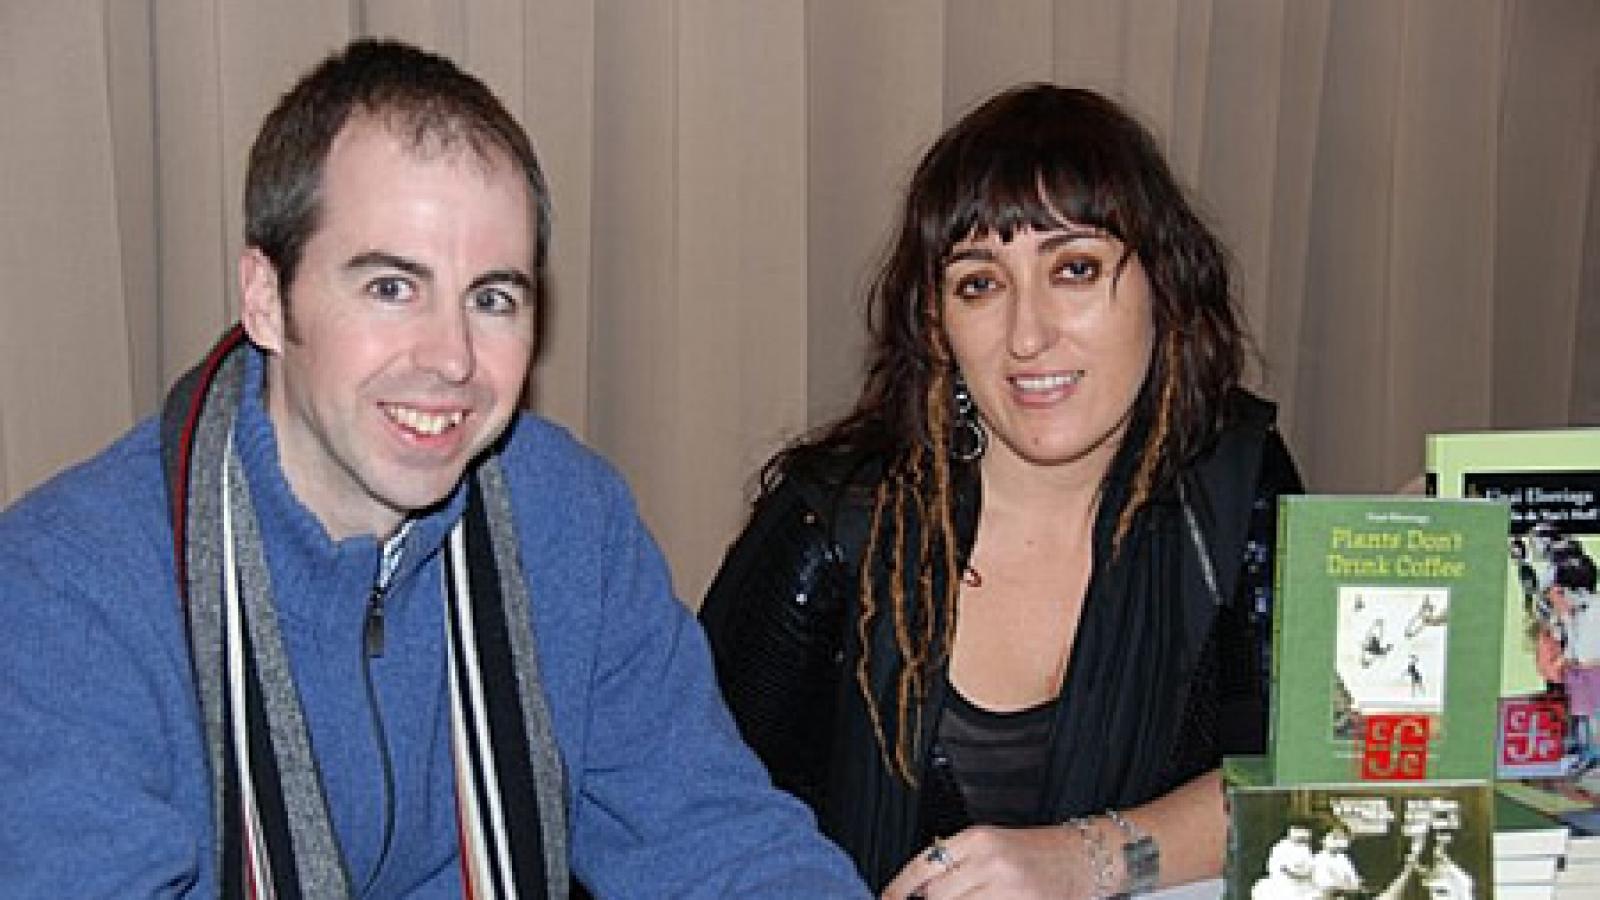 Basque author Unai Elorriaga (left) and translator Amaia Gabantxo at the book launch for "Plants Don?t Drink Coffee" in January 2010. Photo by Debra Corrie